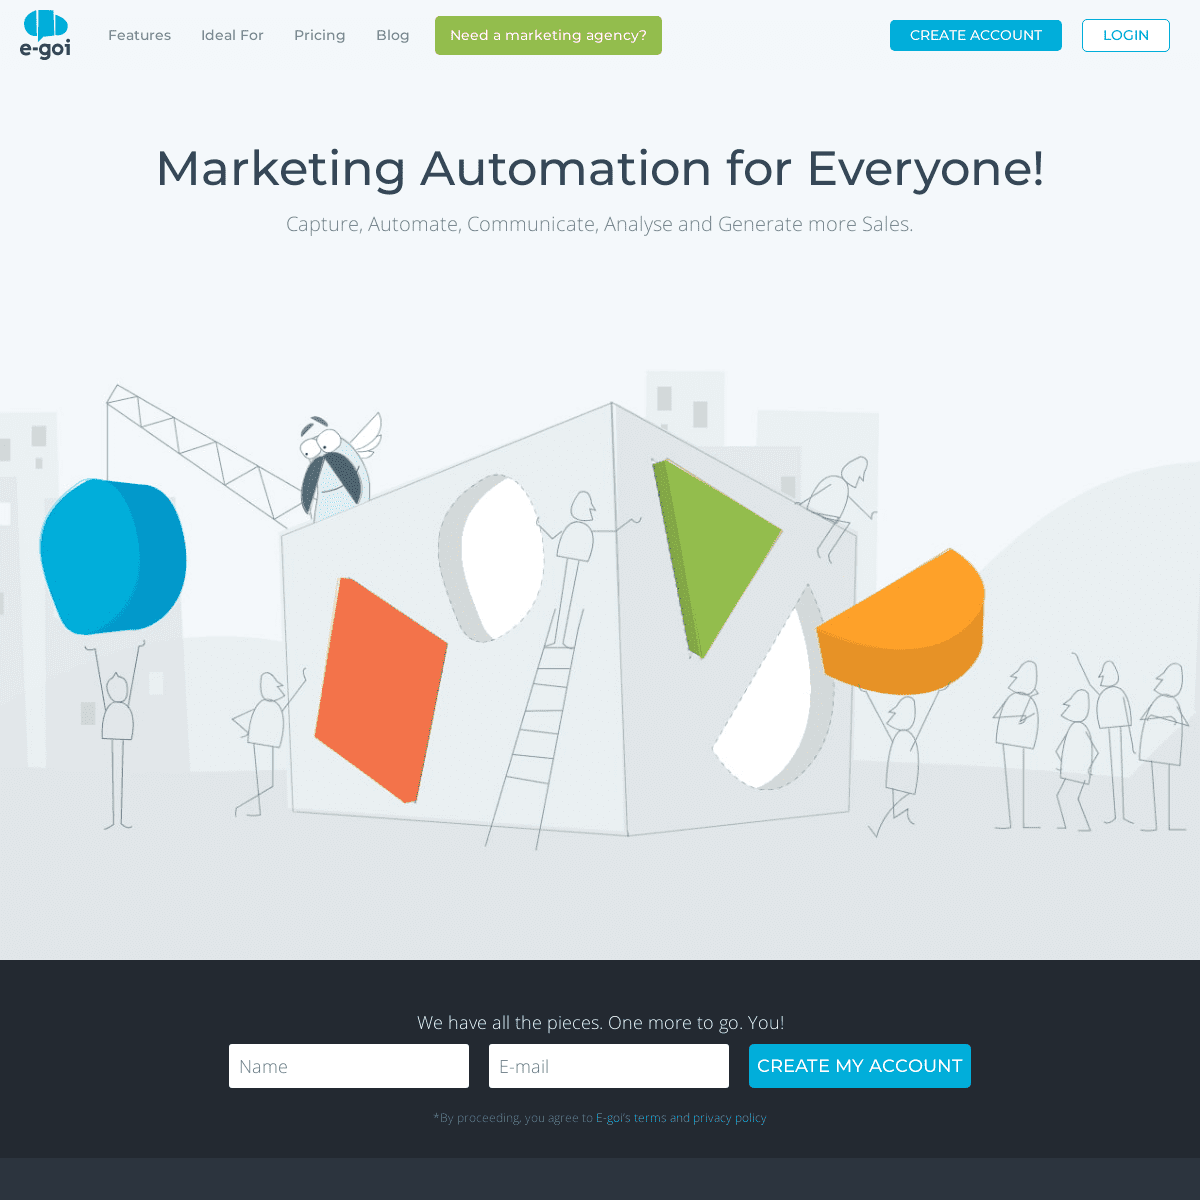 E-goi - Email Marketing and Marketing Automation for Everyone!